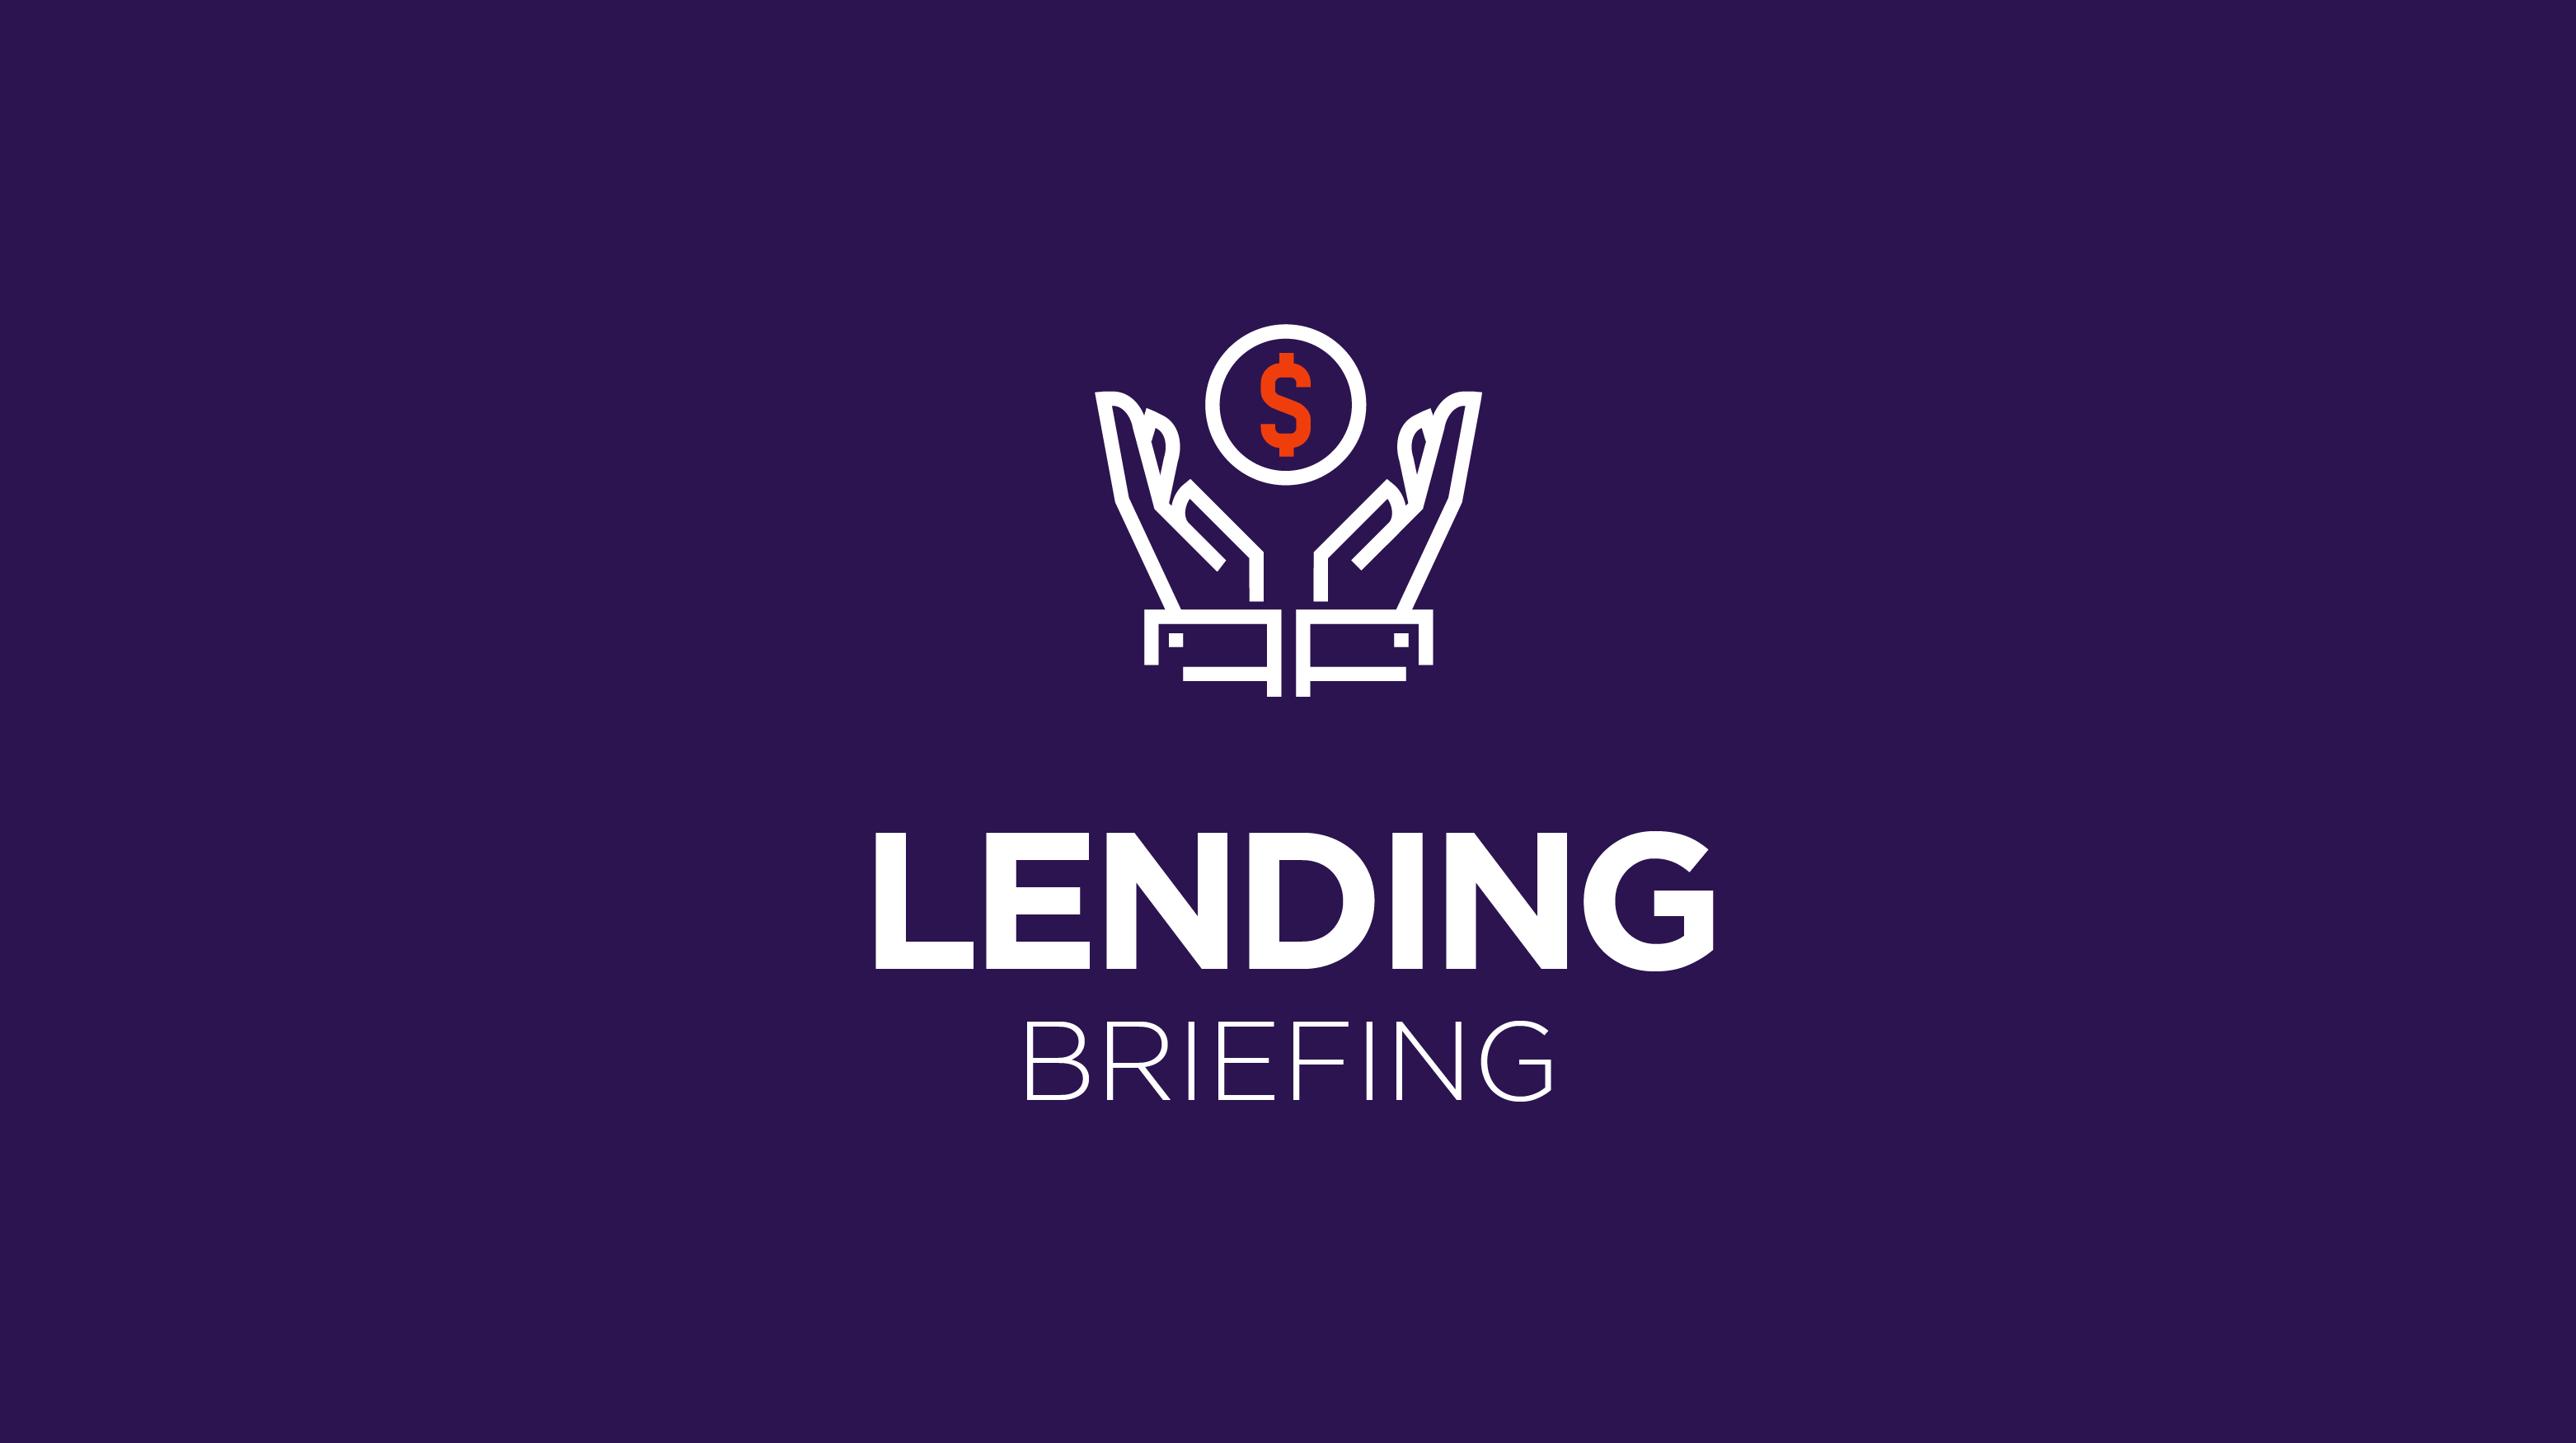 Lending Briefing: Five questions with Vince Passione, CEO and founder of LendKey